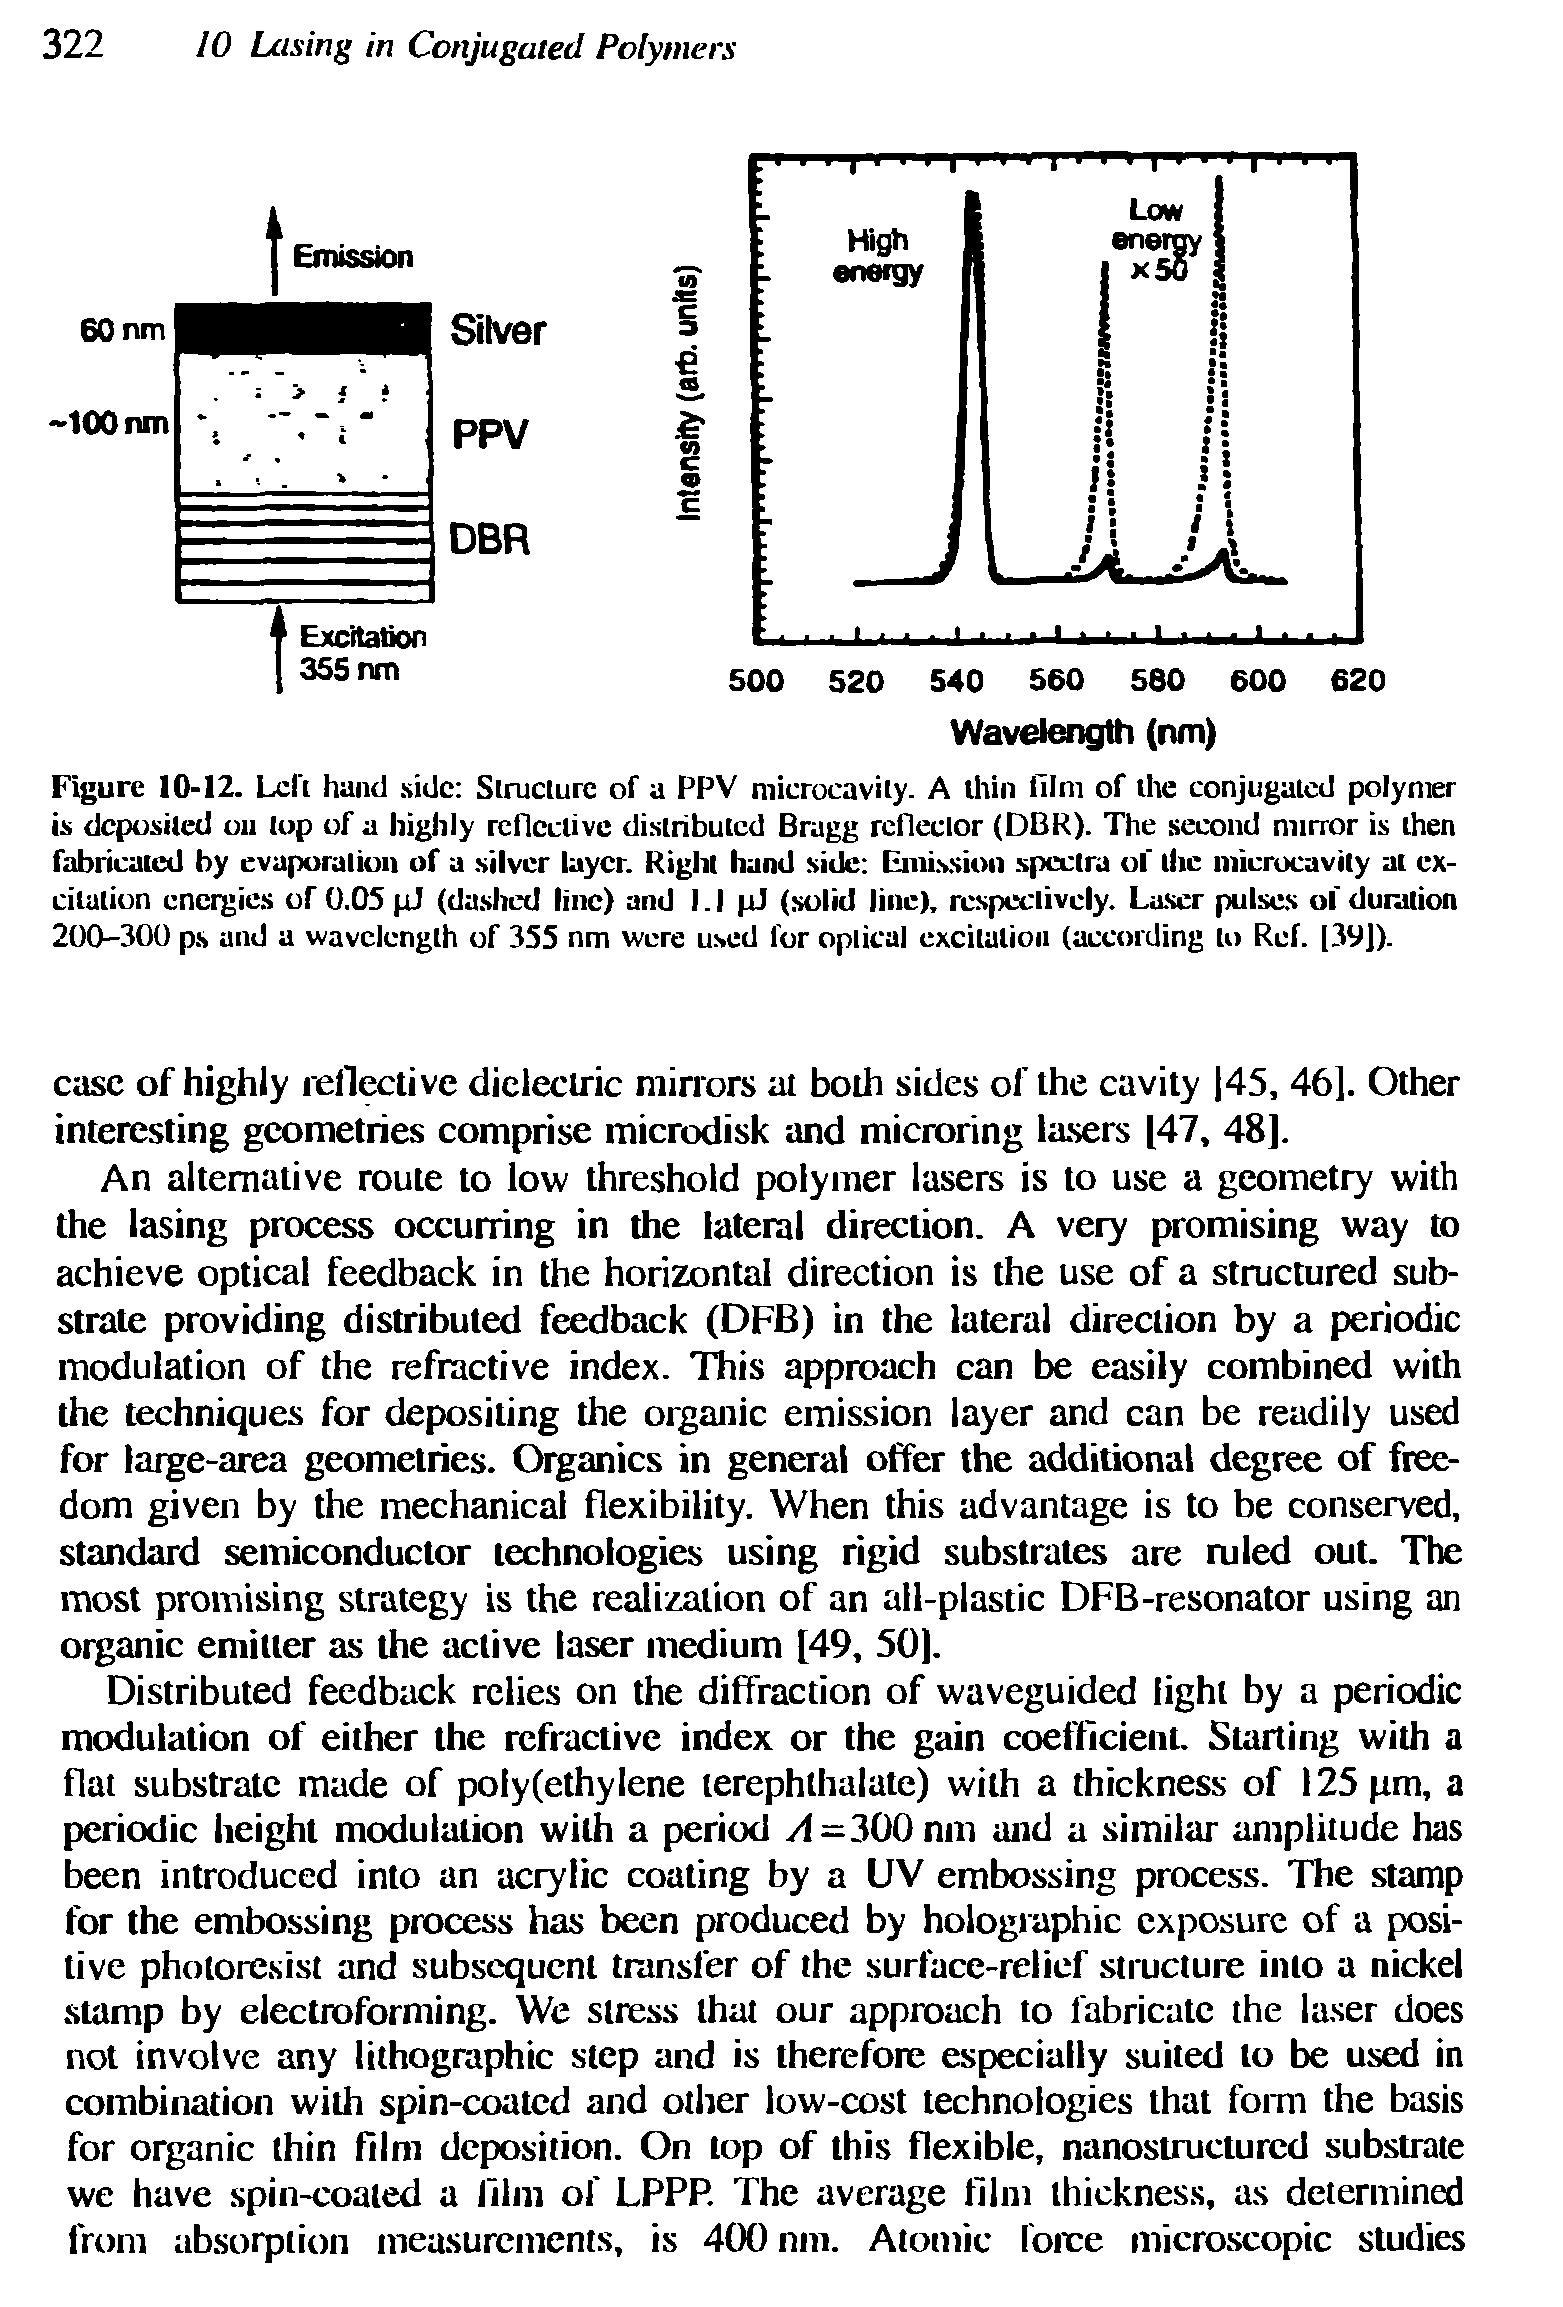 Figure 10-12. Lcfi hand side Slruclure of a PPV microcavily. A thin film of ihe conjugated polymer is deposited on top of a highly reflective distributed Bragg refieclor (DBR). The second mirror is then fabricated by evaporation of a silver layer. Right hand side Emission spectra of the microcavily at excitation cnetgics or 0.0S pJ (dashed line) and l. l pJ (solid line), respectively. Laser pulses ol duration 200-300 ps and a wavelength of 355 nm were used for optical excitation (according to Ref. [39]).